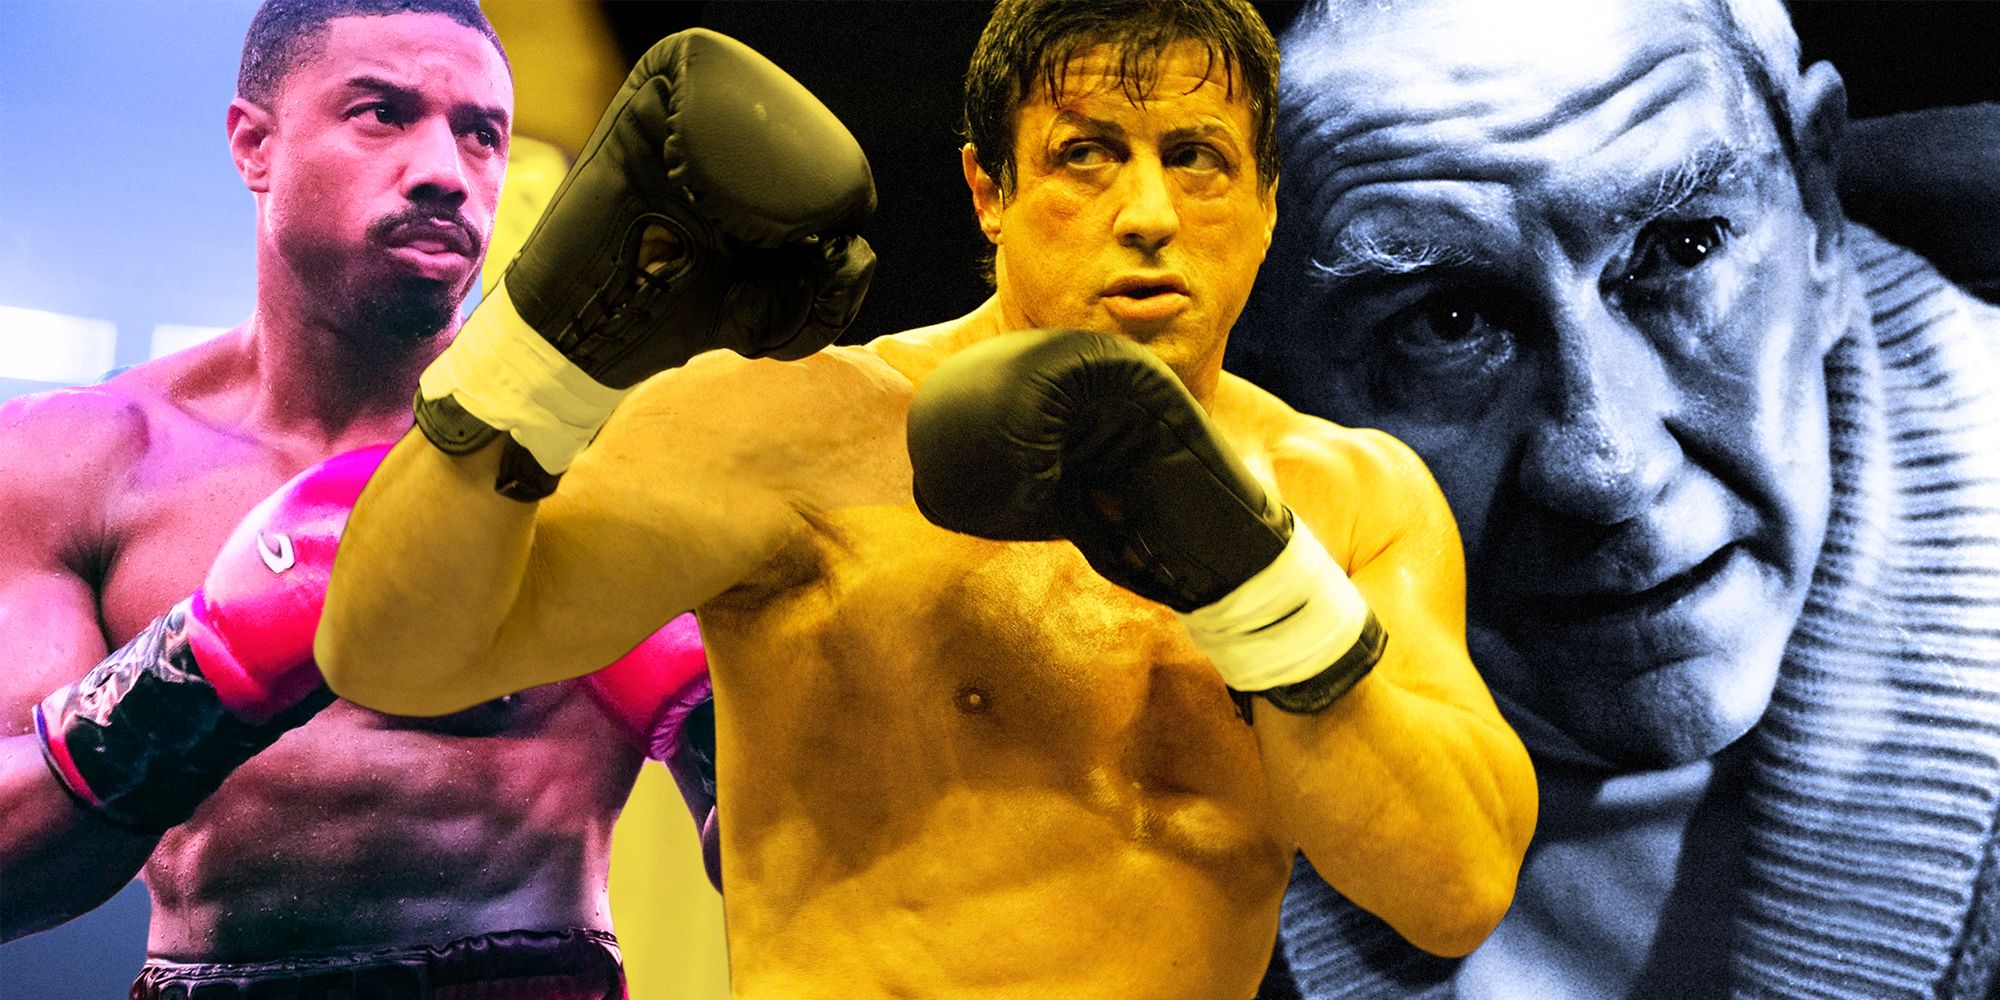 Collage of Michael B Jordan as Adonis in Creed 3, Sylvester Stallone as Rocky in Rocky Balboa, and Burgess Meredith as Mickey in Rocky